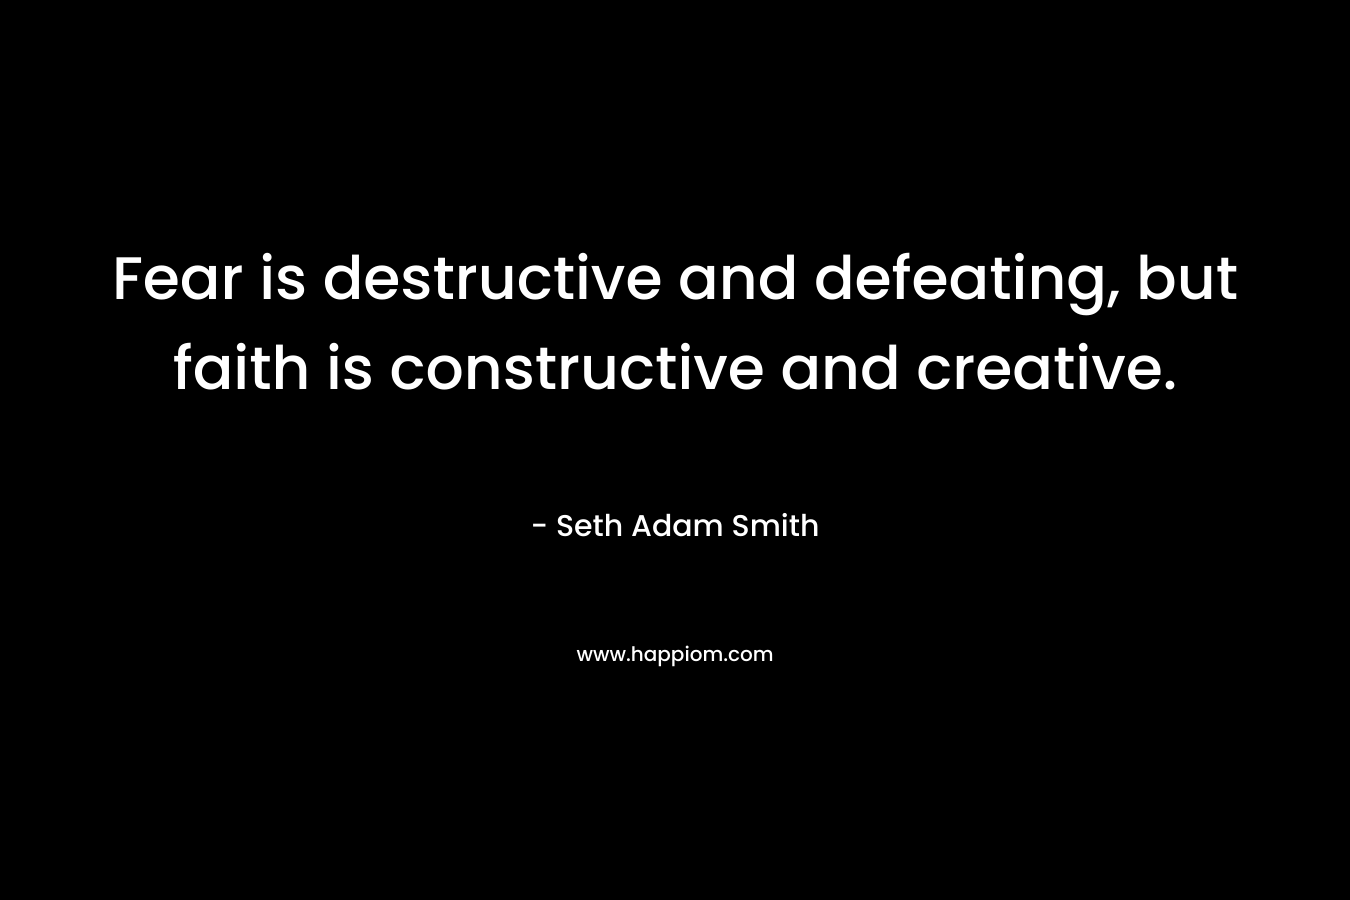 Fear is destructive and defeating, but faith is constructive and creative. – Seth Adam Smith